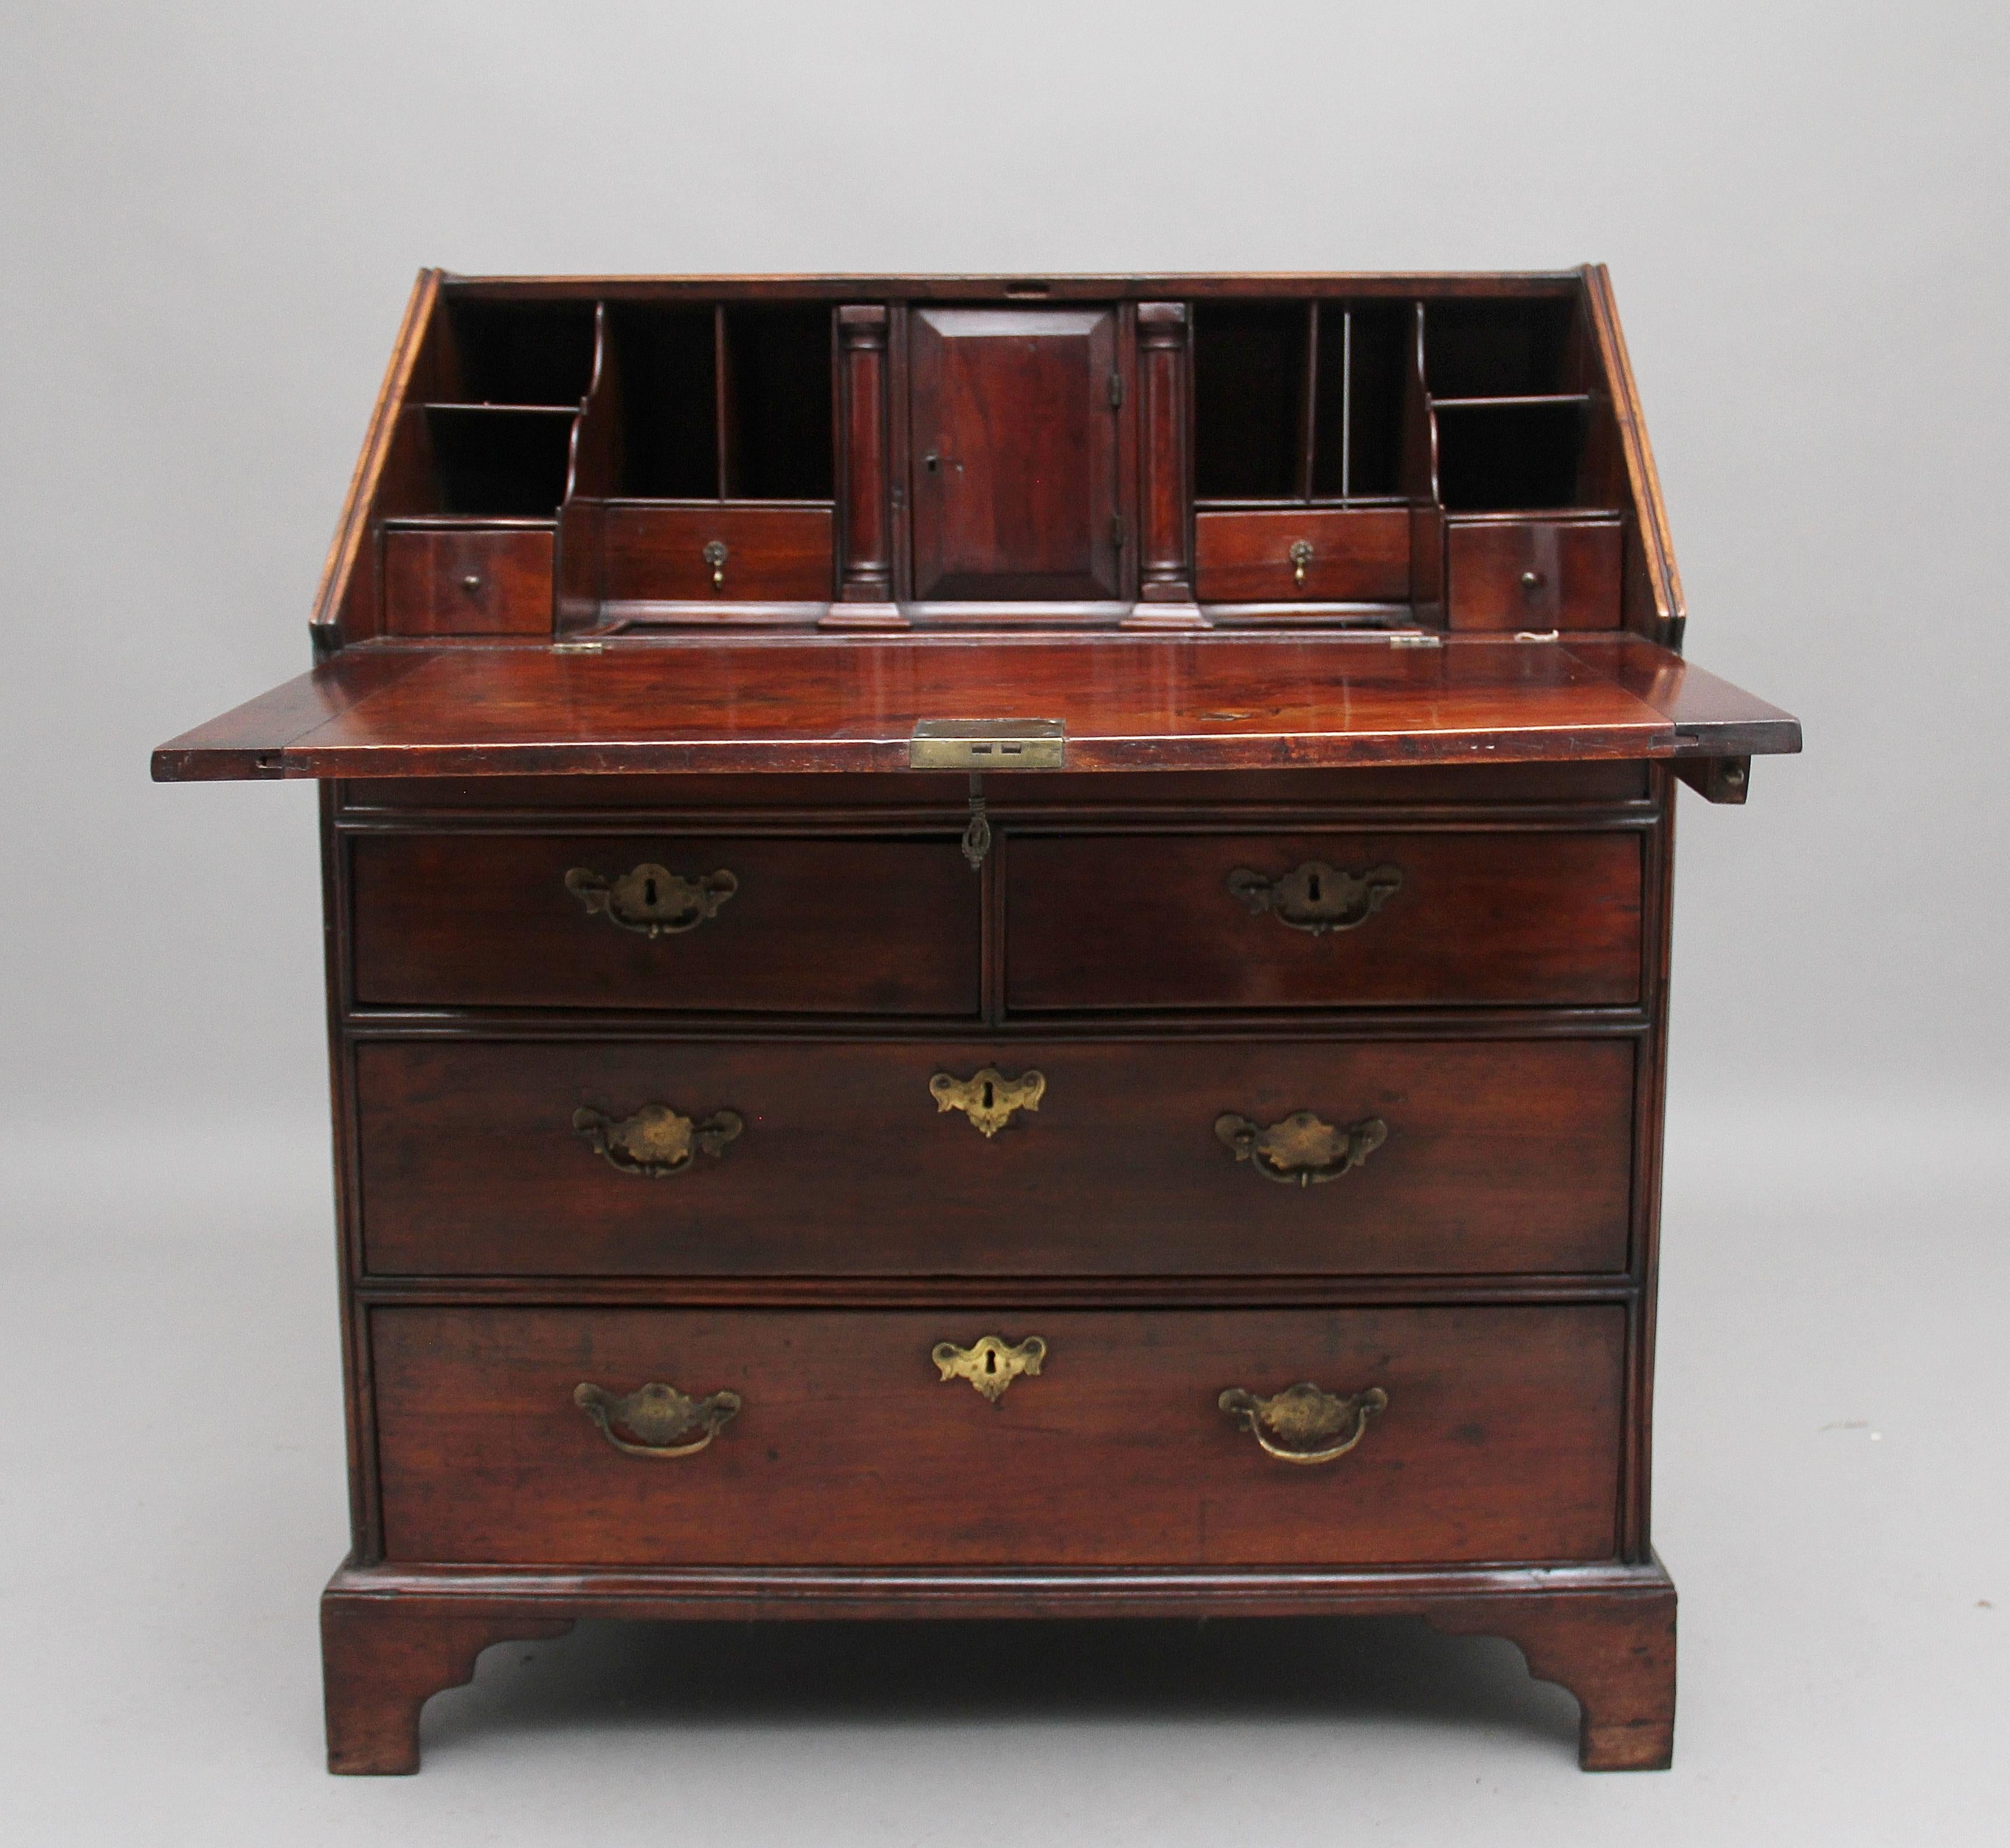 18th century walnut bureau, the top having a double moulded edge with the fall opening to reveal a lovely fitted interior, with various drawers, compartments and a well, the writing surface of fall having a lovely figured top, two short over town